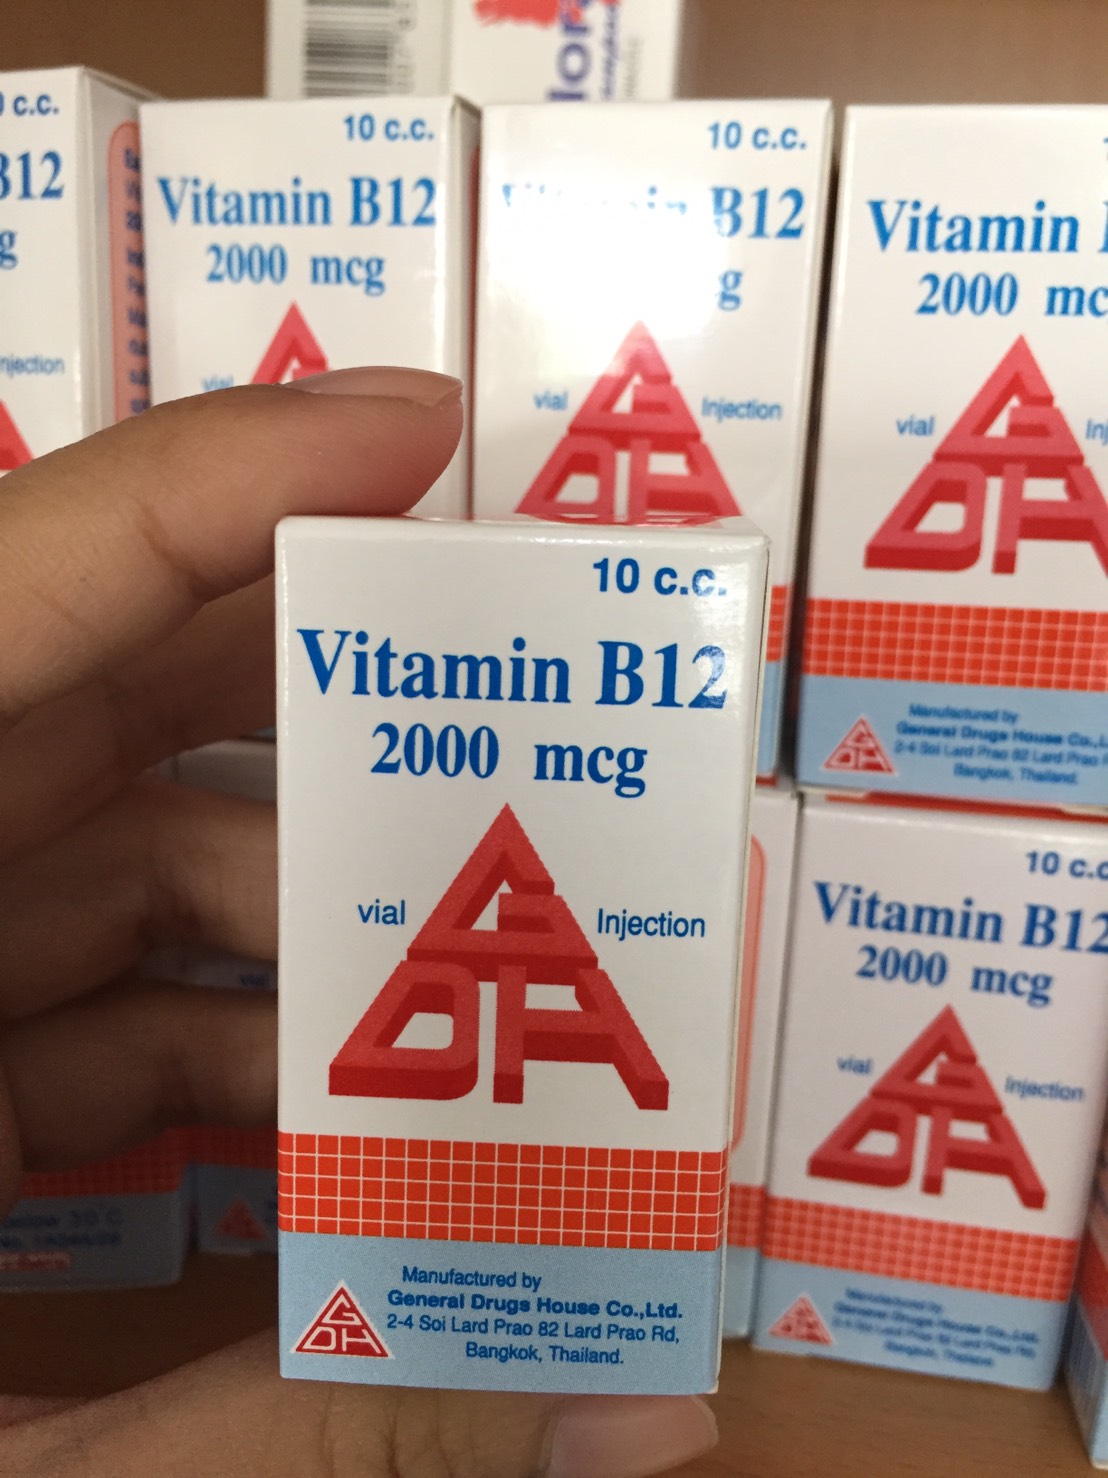 BEST SELLER OF THE MONTH VITAMIN B12 2000 mcg INJECTION ...